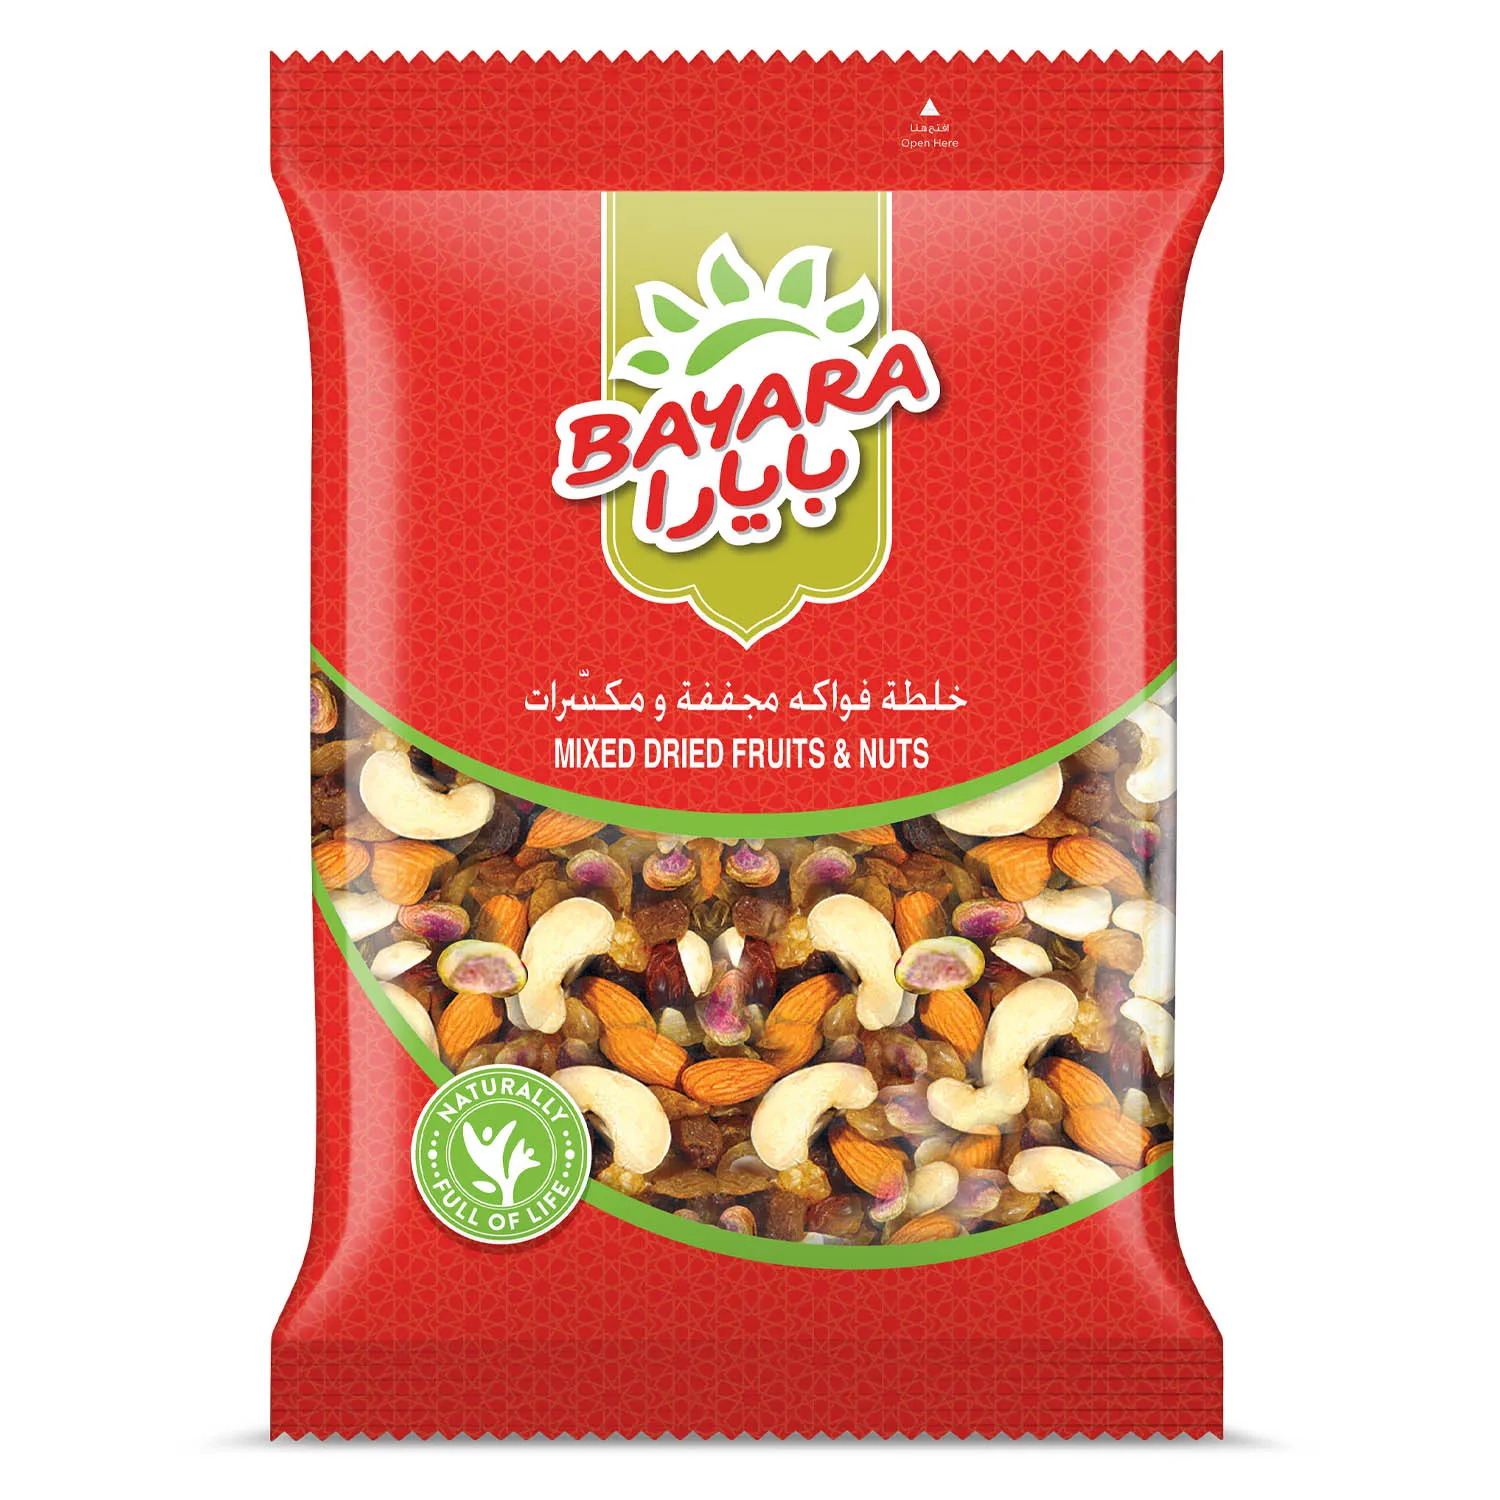 MIXED DRIED FRUITS & NUTS 400G